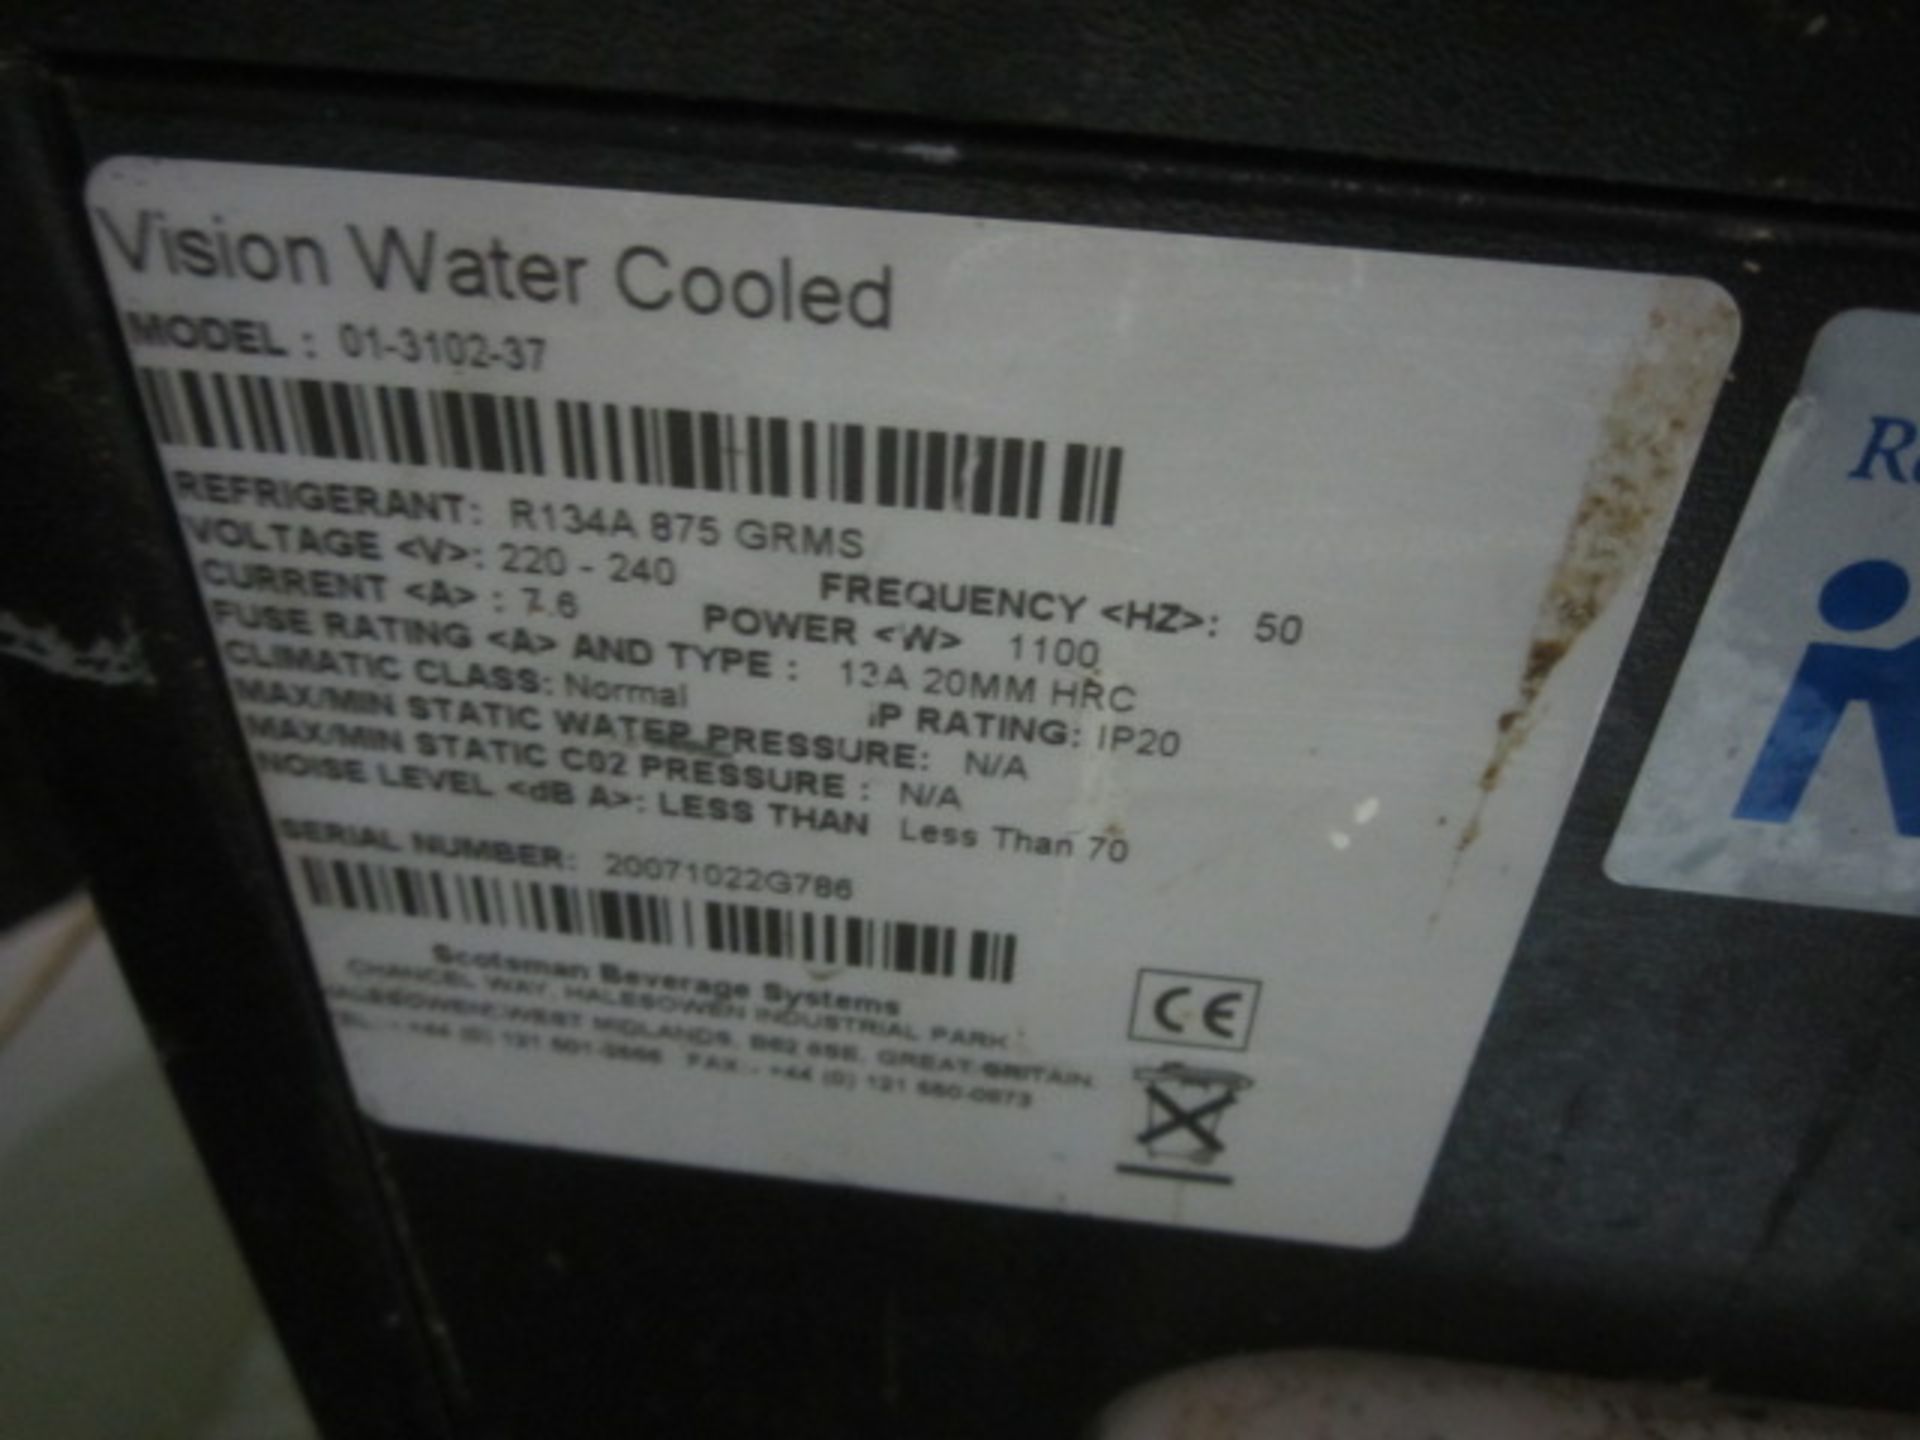 Scotsman Vision Max Ice water cooled chiller pump, model 01-3102-37, serial no. 20071022G786 (re- - Image 4 of 4